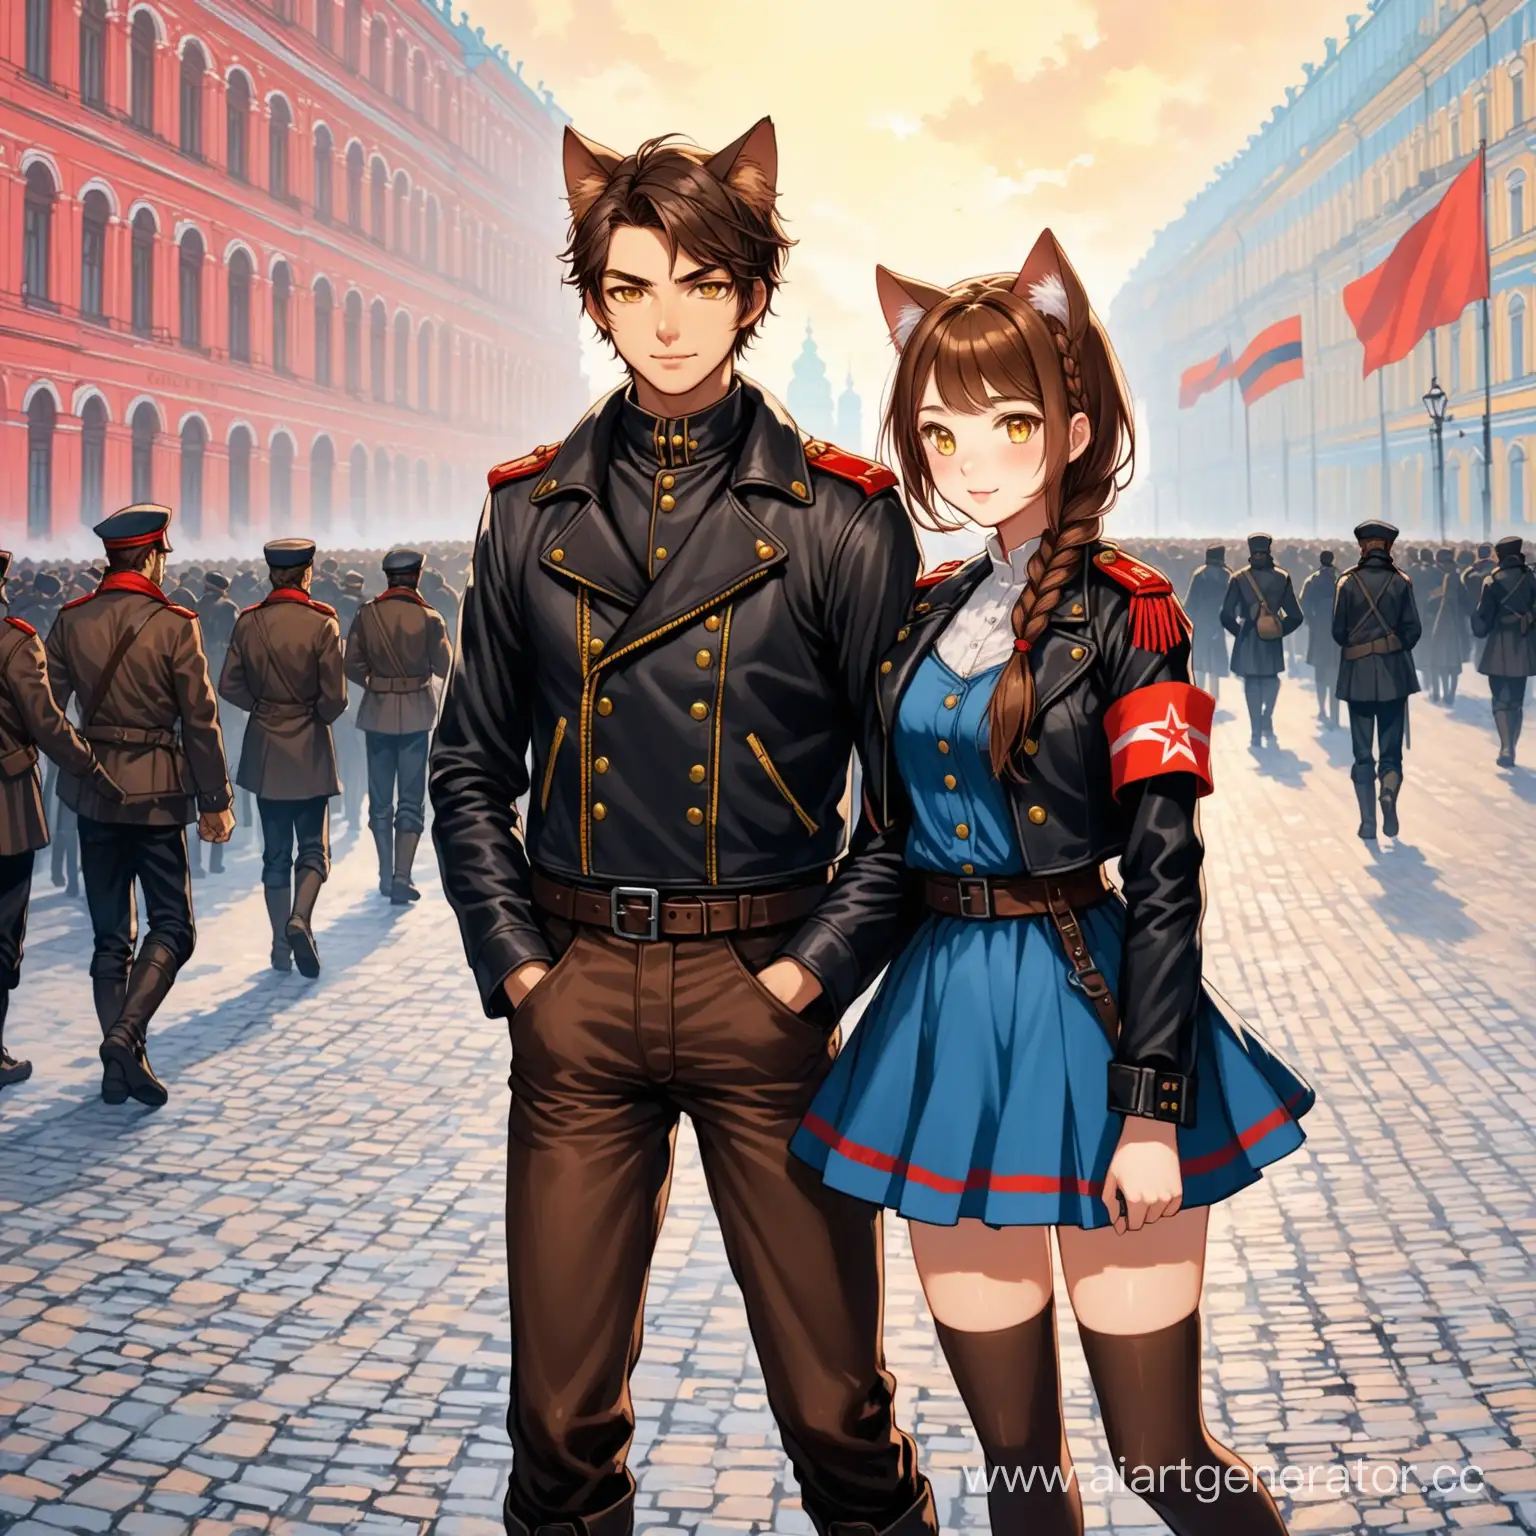 Catgirl yellow eyes brown hair (one short braid), brown cat ears, short blue skirt, black leather jacket with red armband, black stockings and her boyfriend, October revolution in Saint-Petersburg 